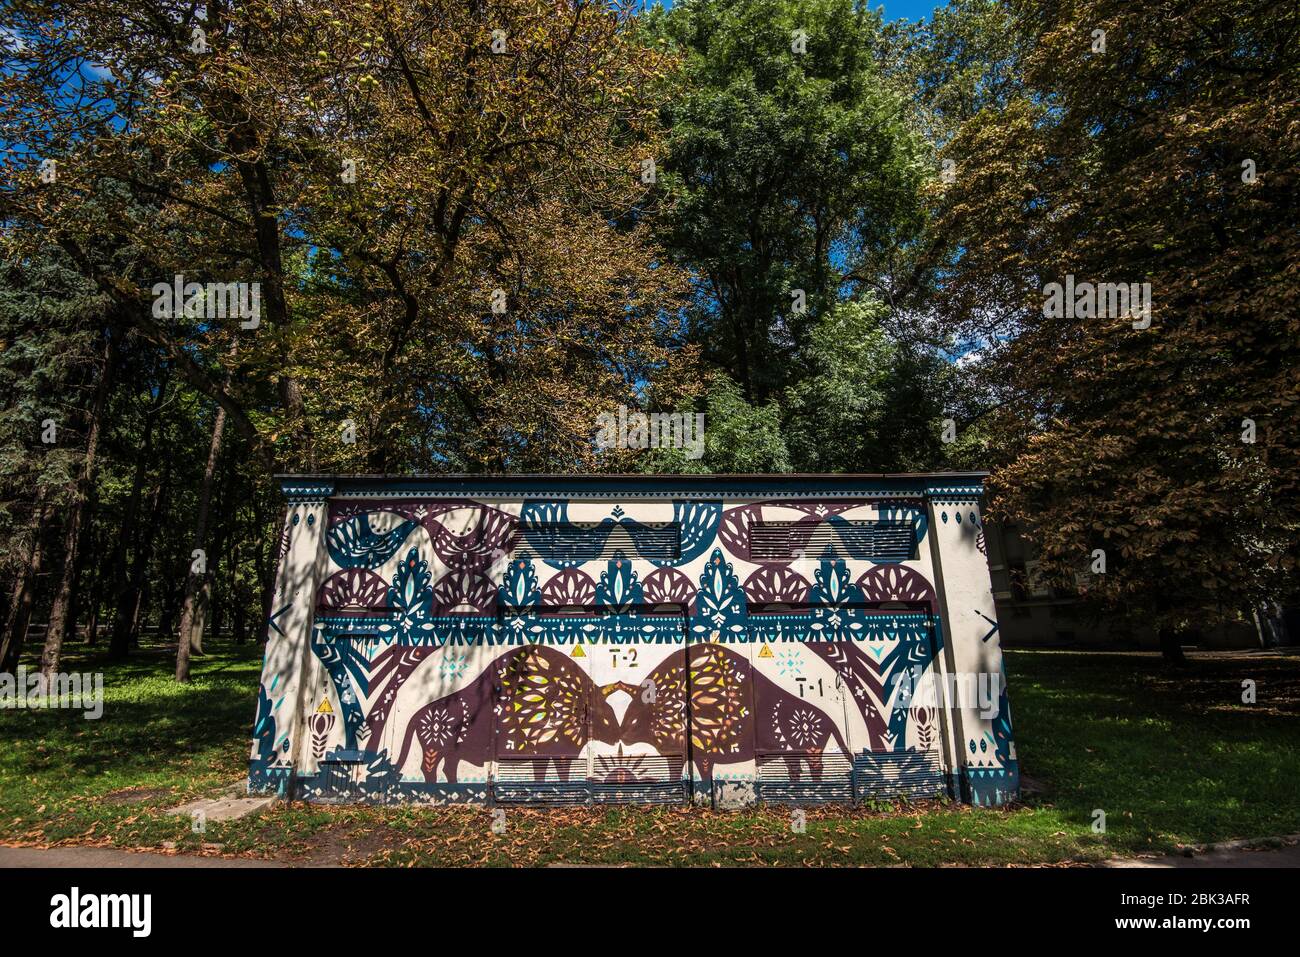 Graffiti with Bisons and National Ornaments in Minsk Stock Photo